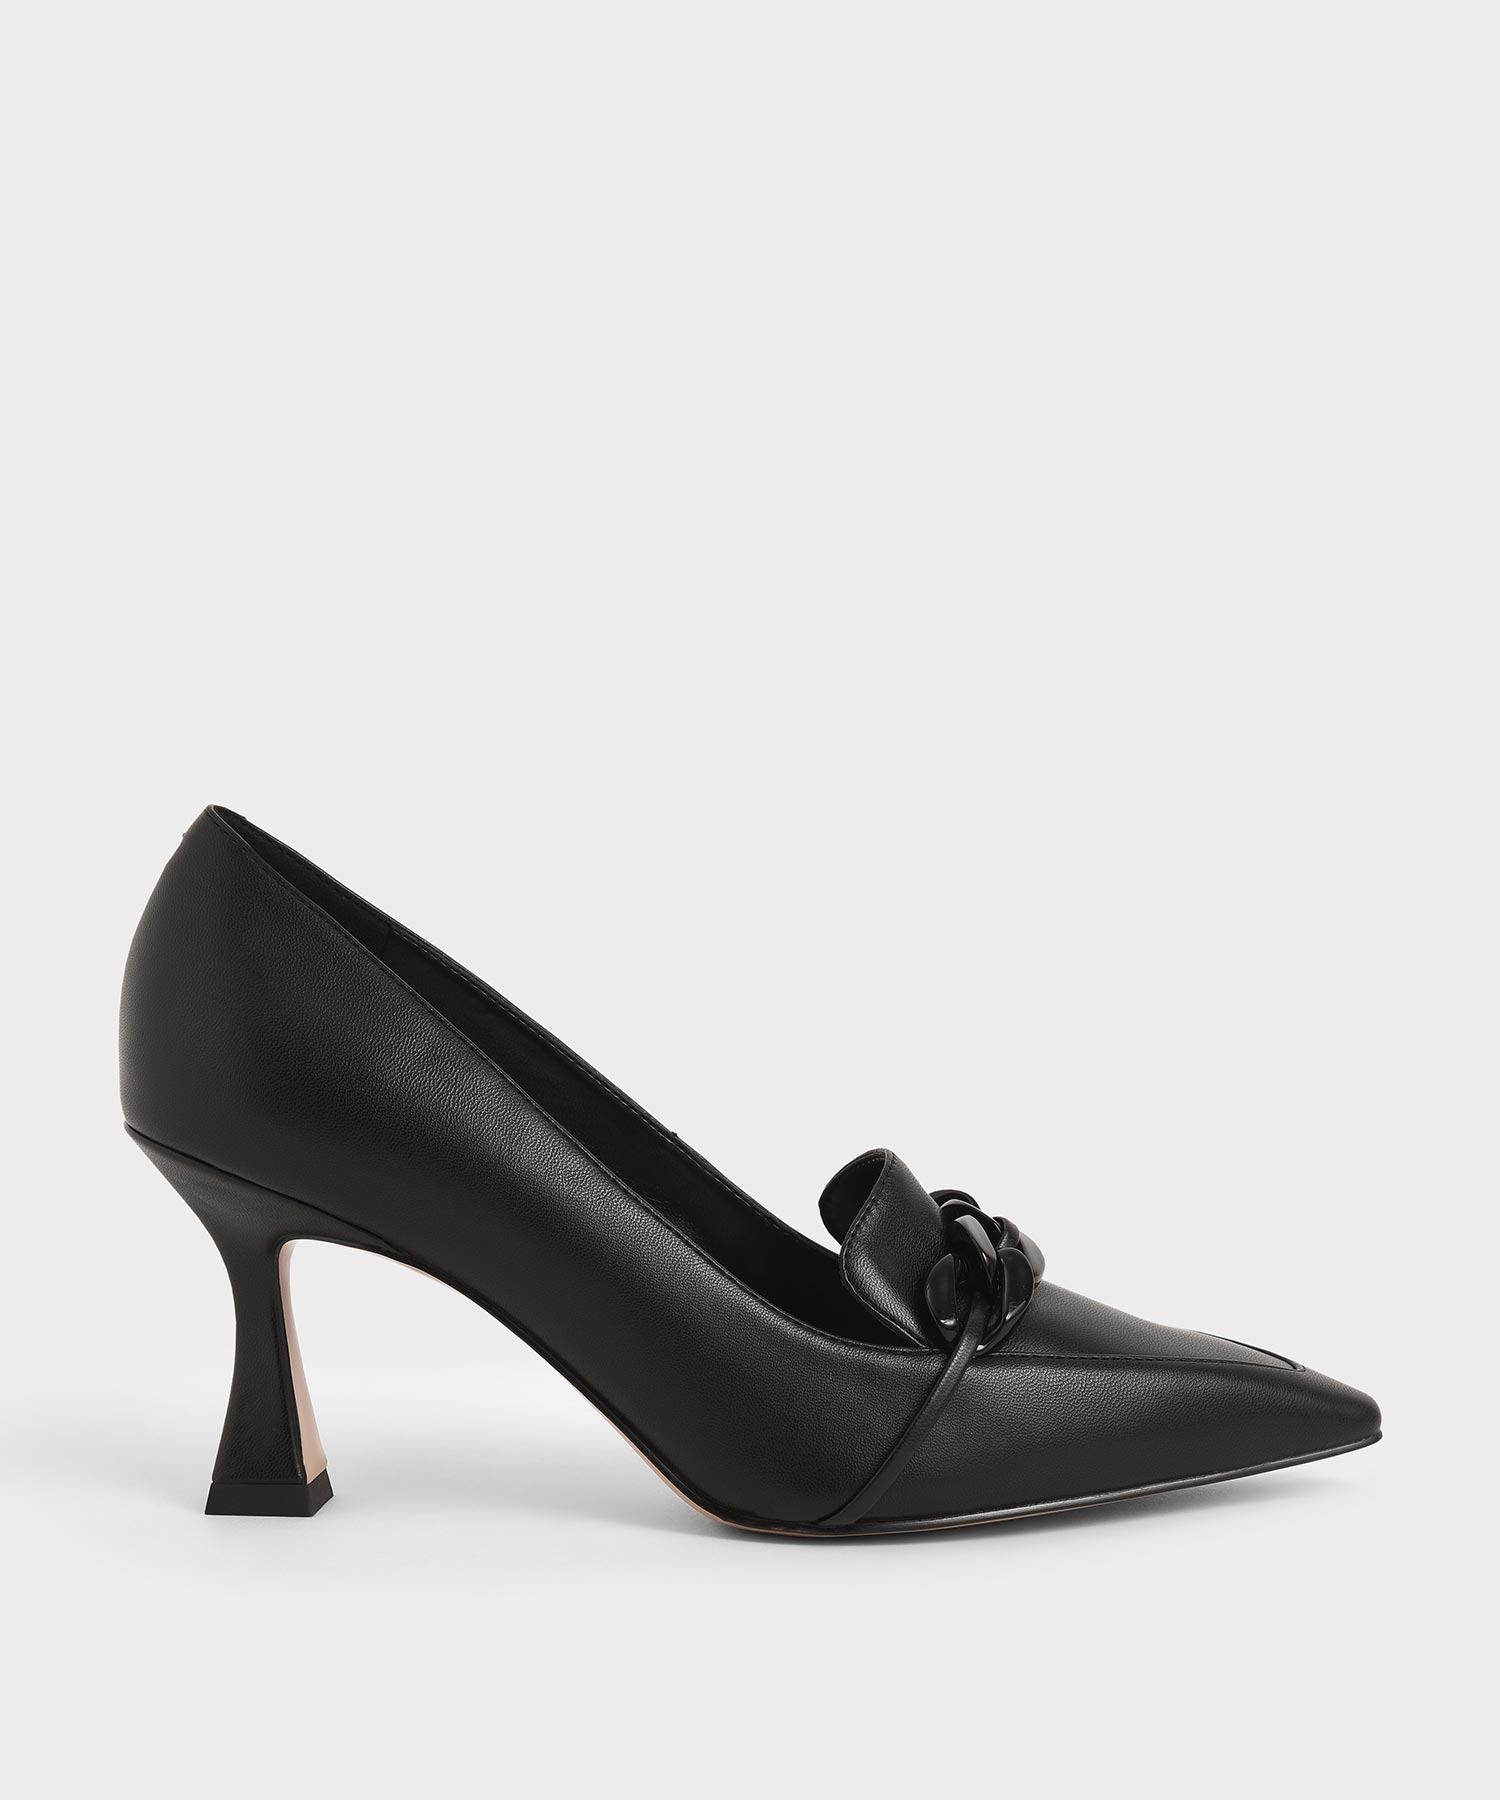 CHARLES KEITHチェーンエンベリッシュド ローファーパンプス SALE 86%OFF Chain-Embellished お歳暮 Pumps Loafer